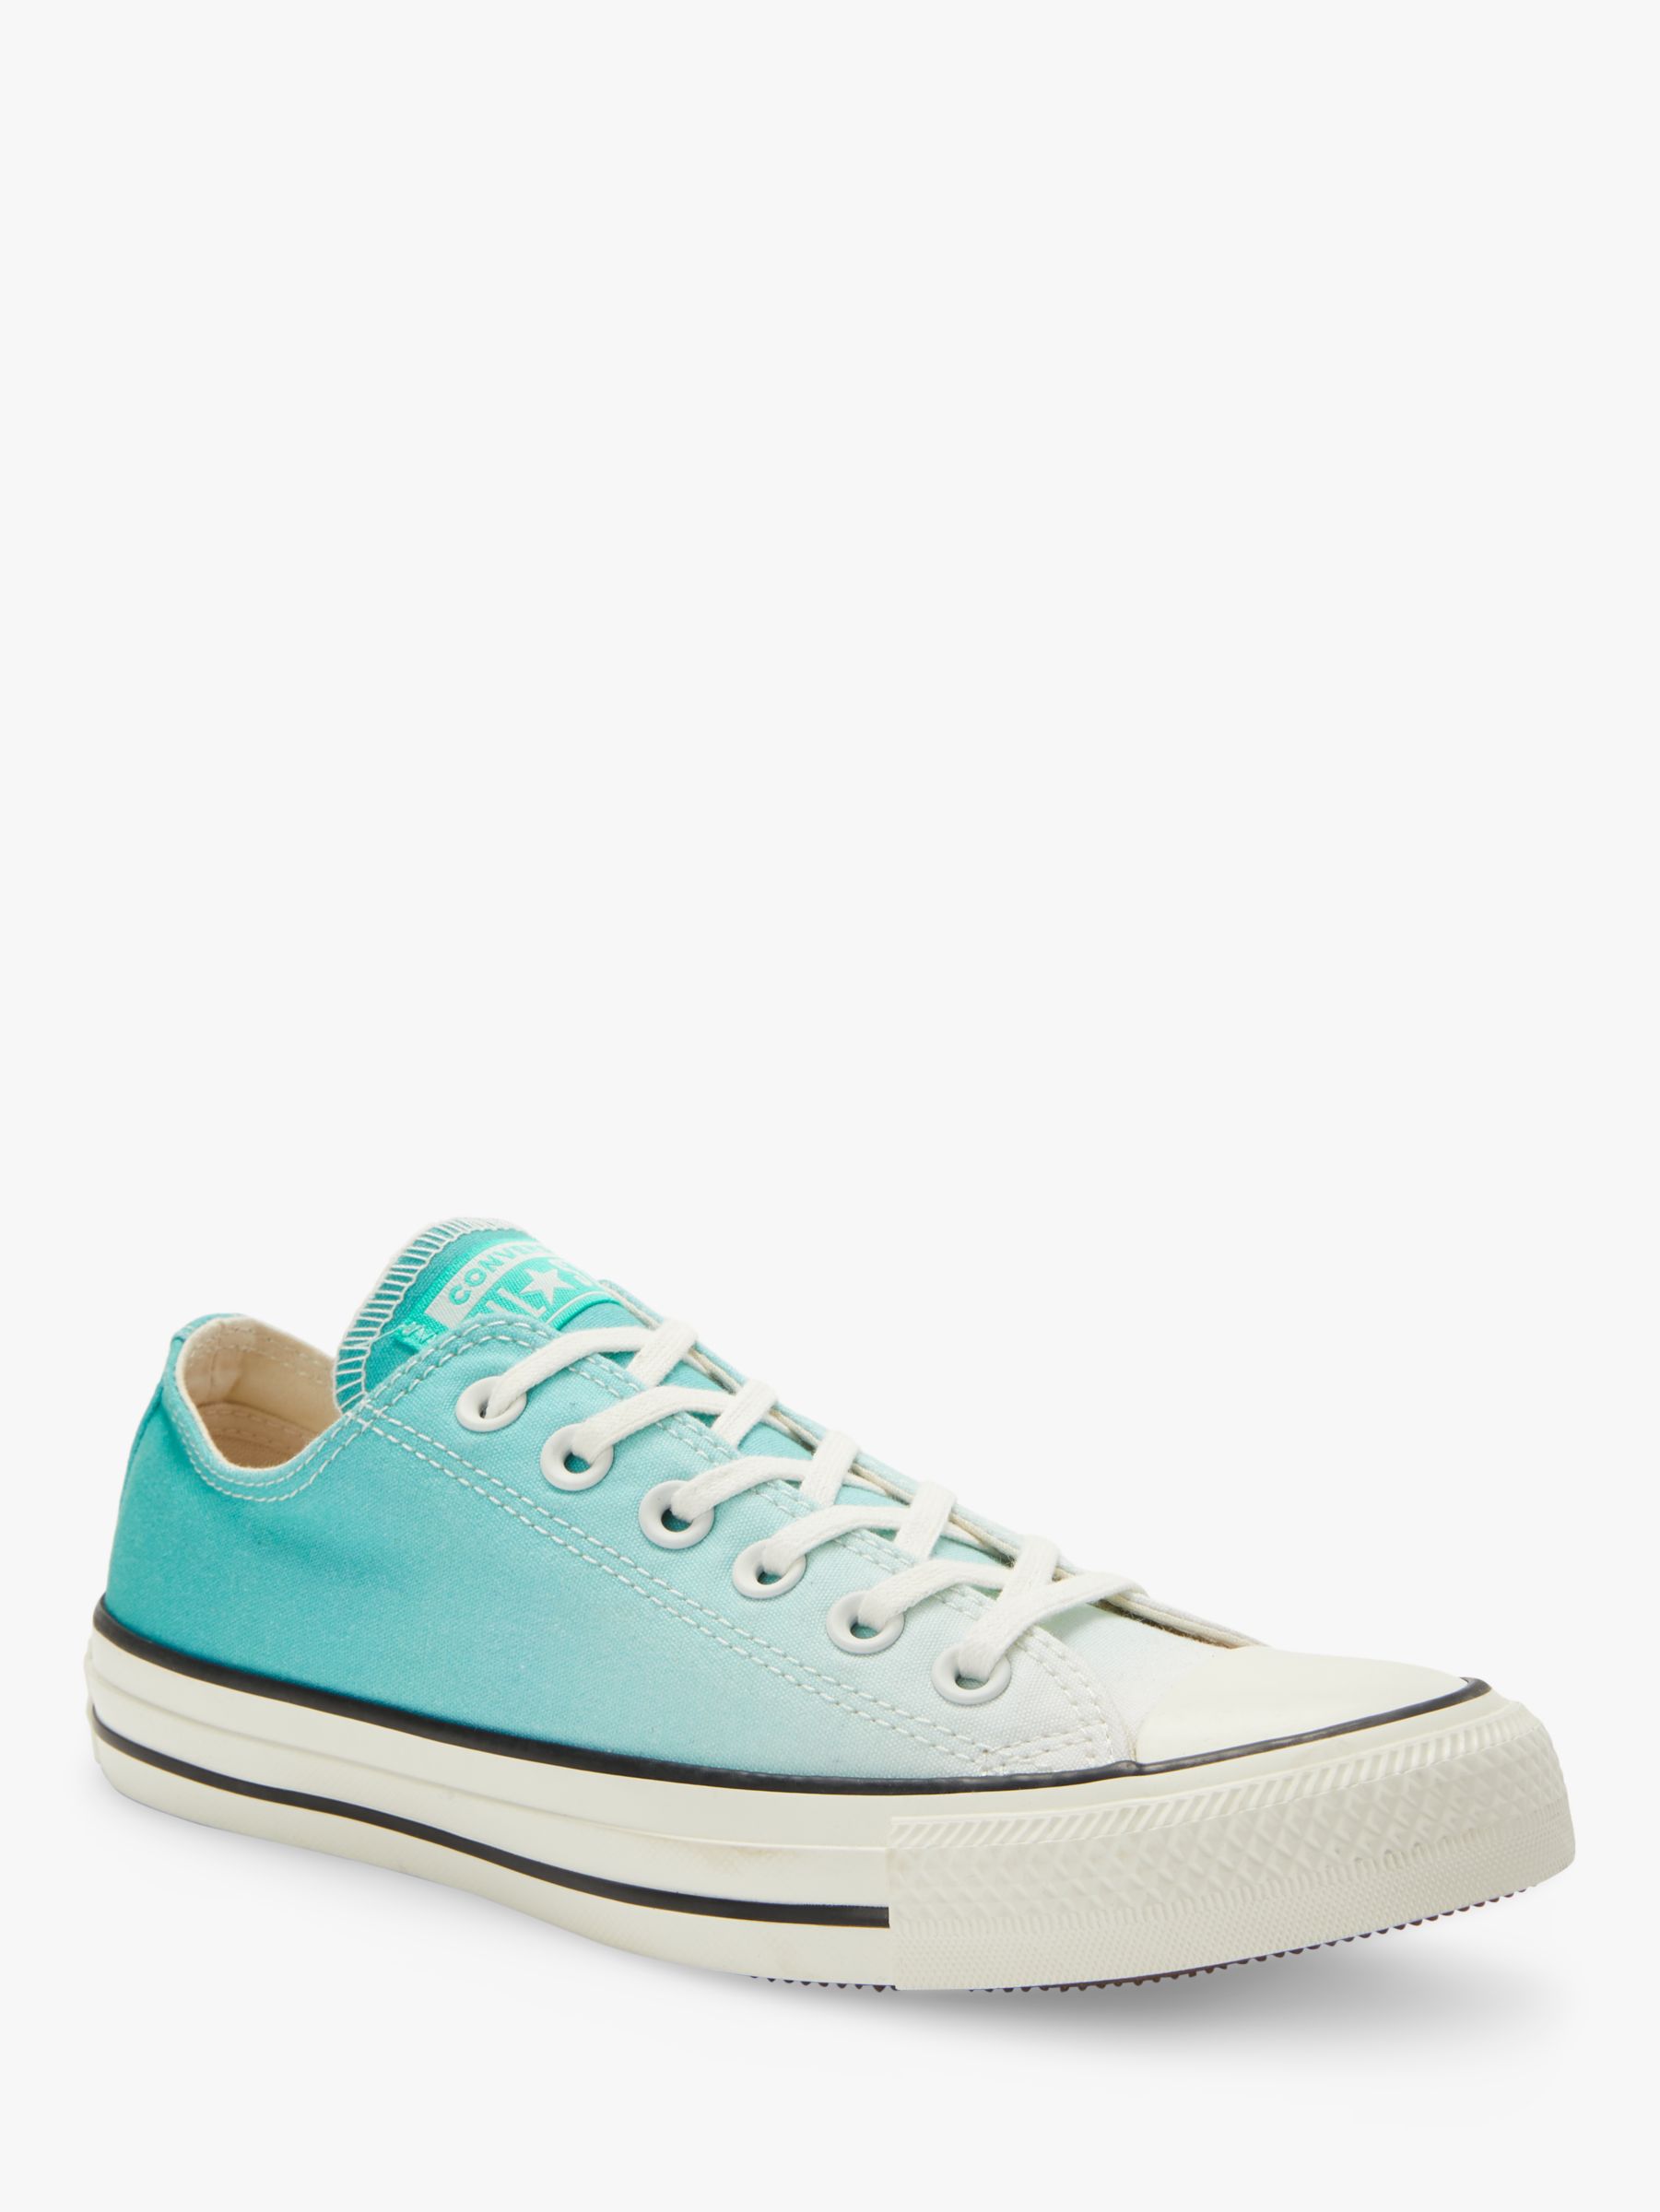 converse chuck taylor all star ox ombre wash sneaker